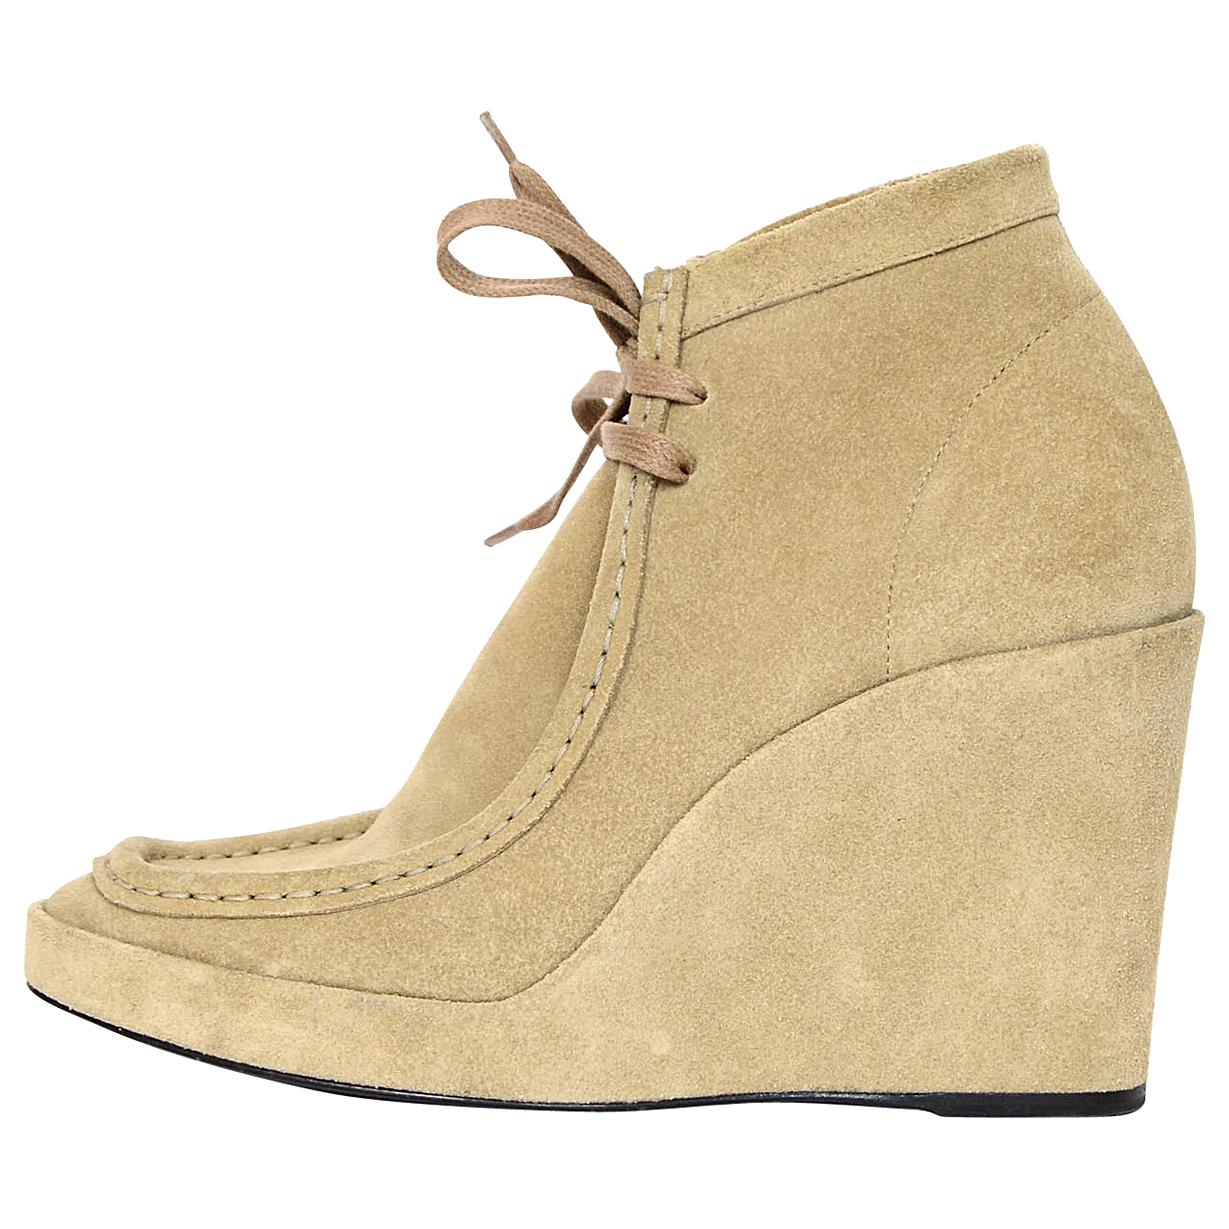 Balenciaga Tan Suede Wedge Lace Front Ankle Boots Sz 39